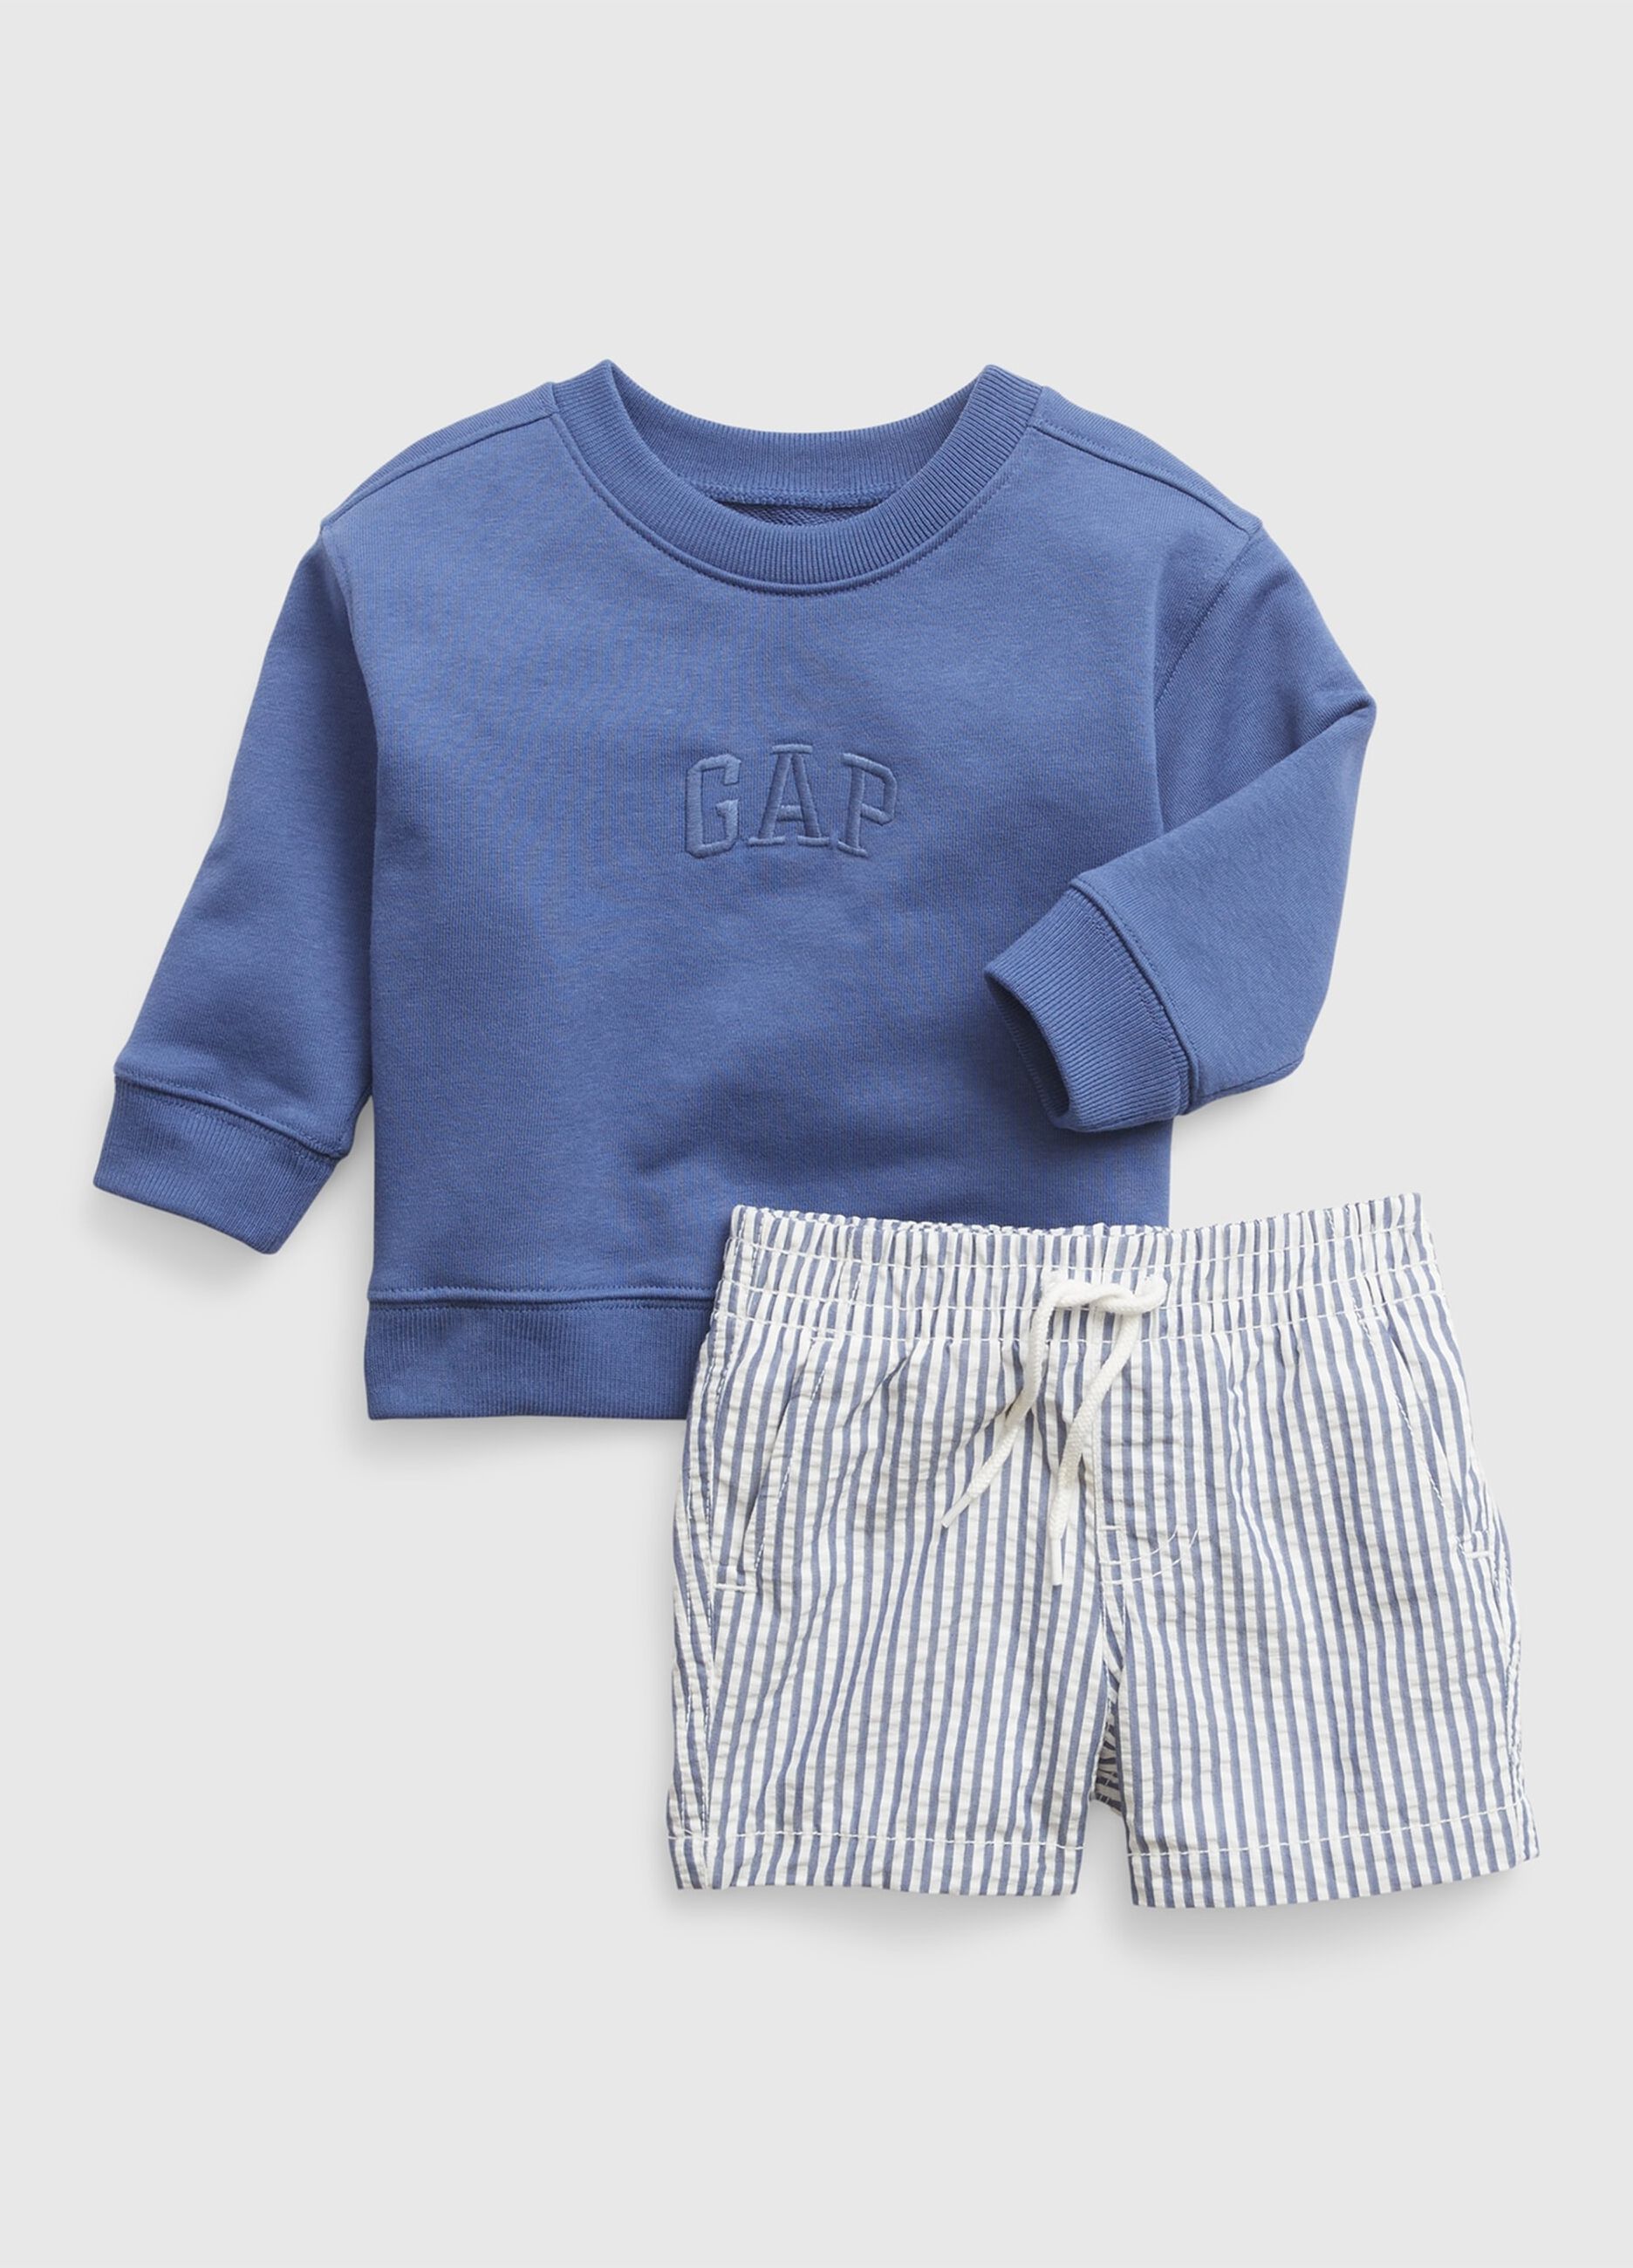 Jogging set with sweatshirt and shorts in cotton